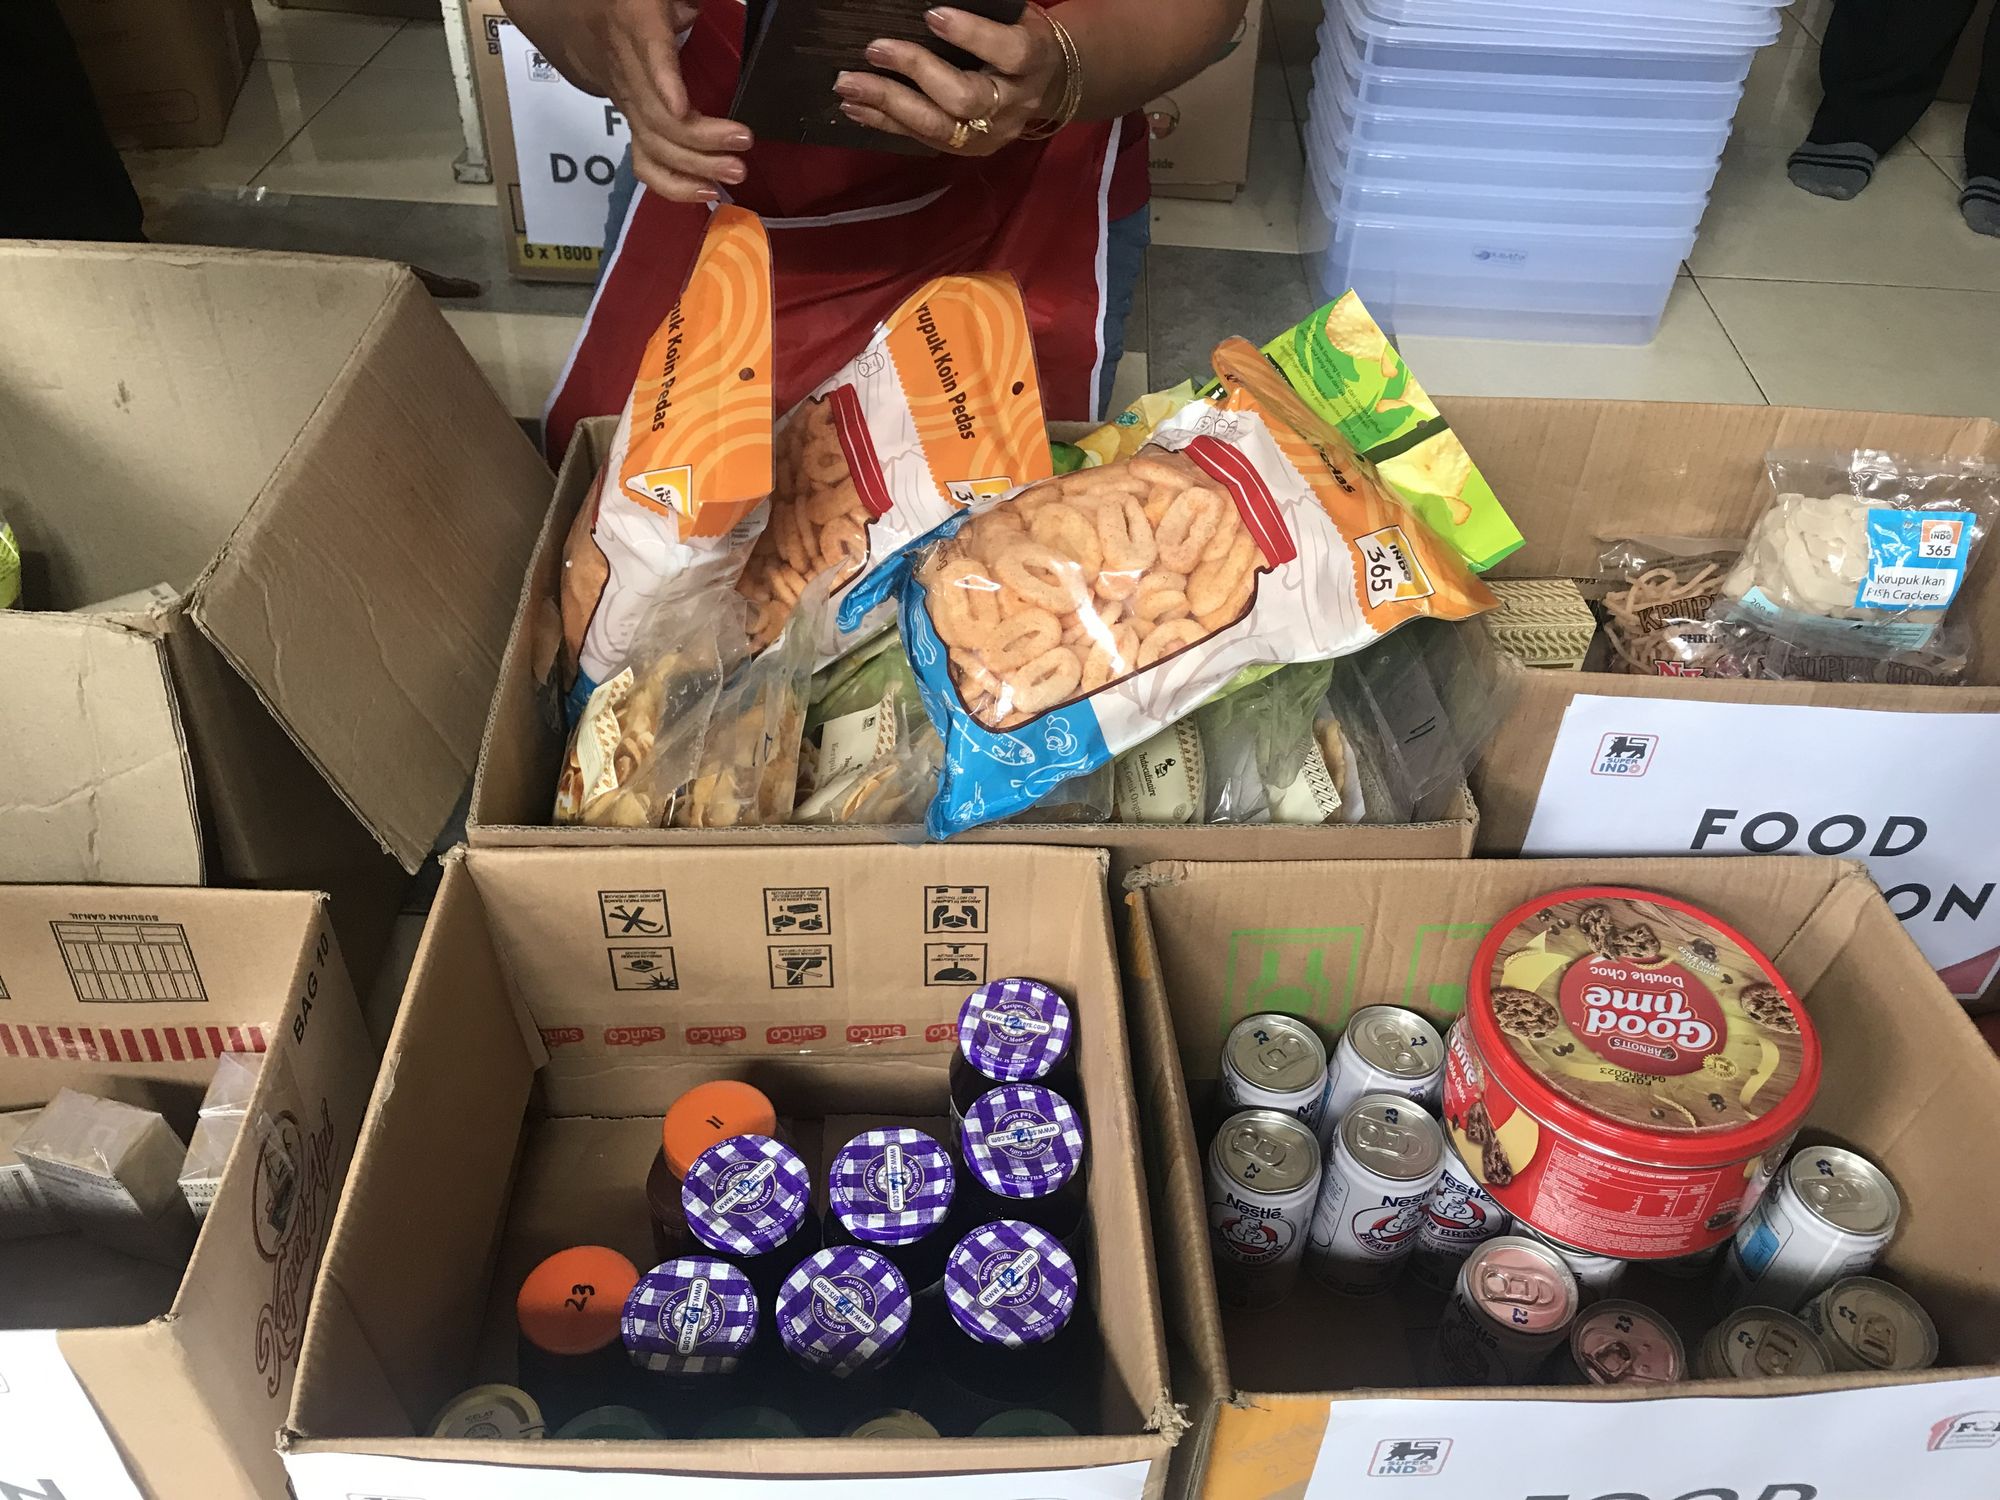 Surplus food donation sorted according to product groups by the food bank.